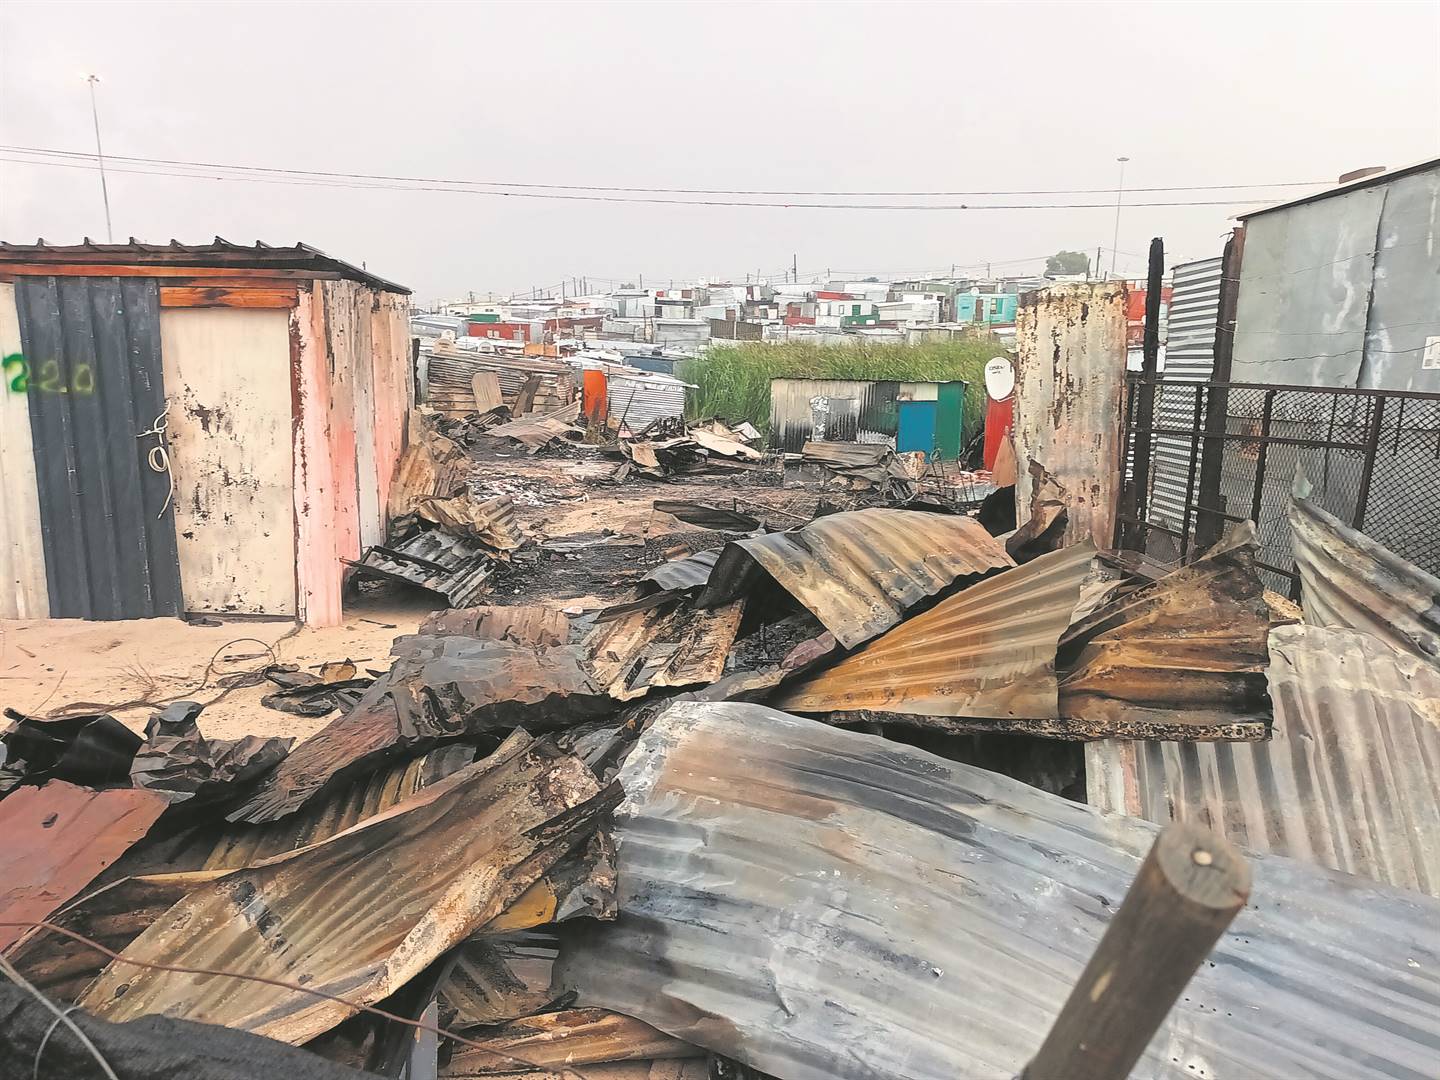 Some of the debris after the fatal shack fire.PHOTO: UNATHI OBOSE